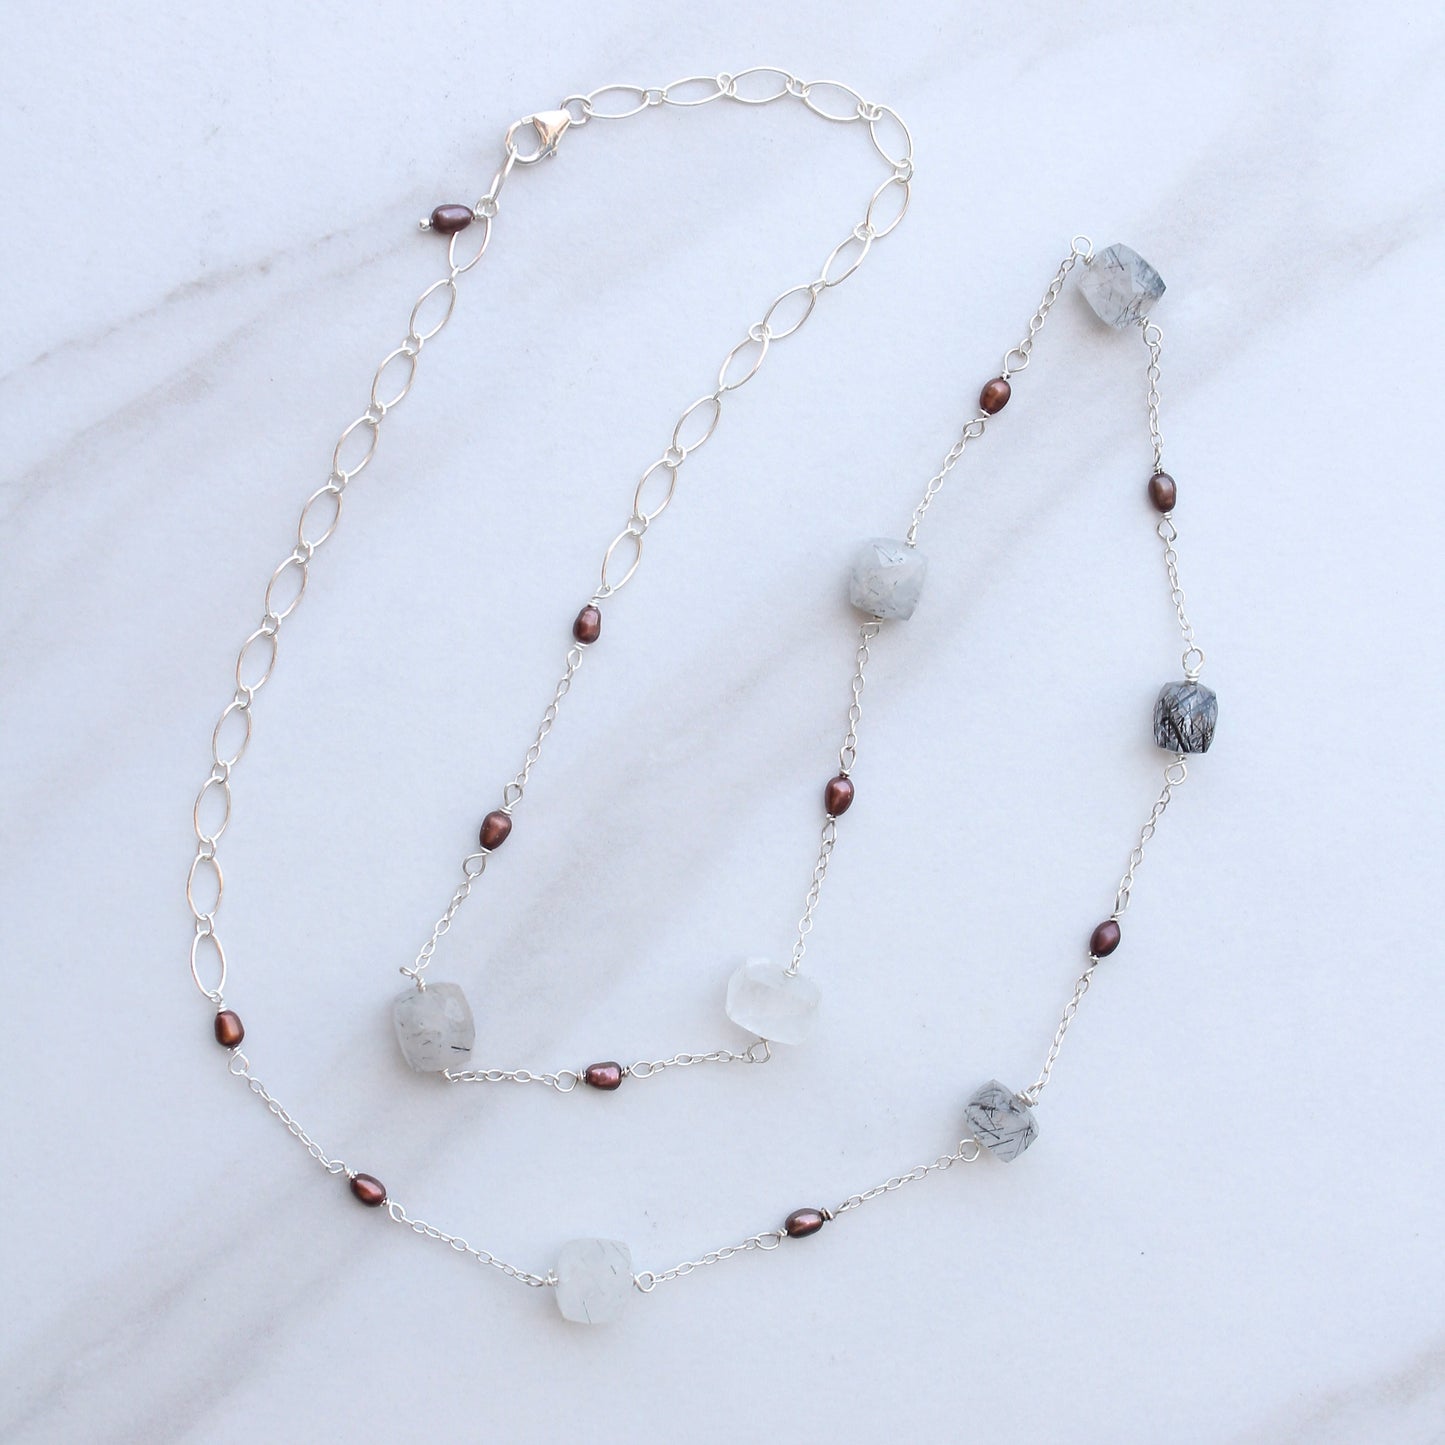 Rutile Quartz and Brown Pearl Necklace